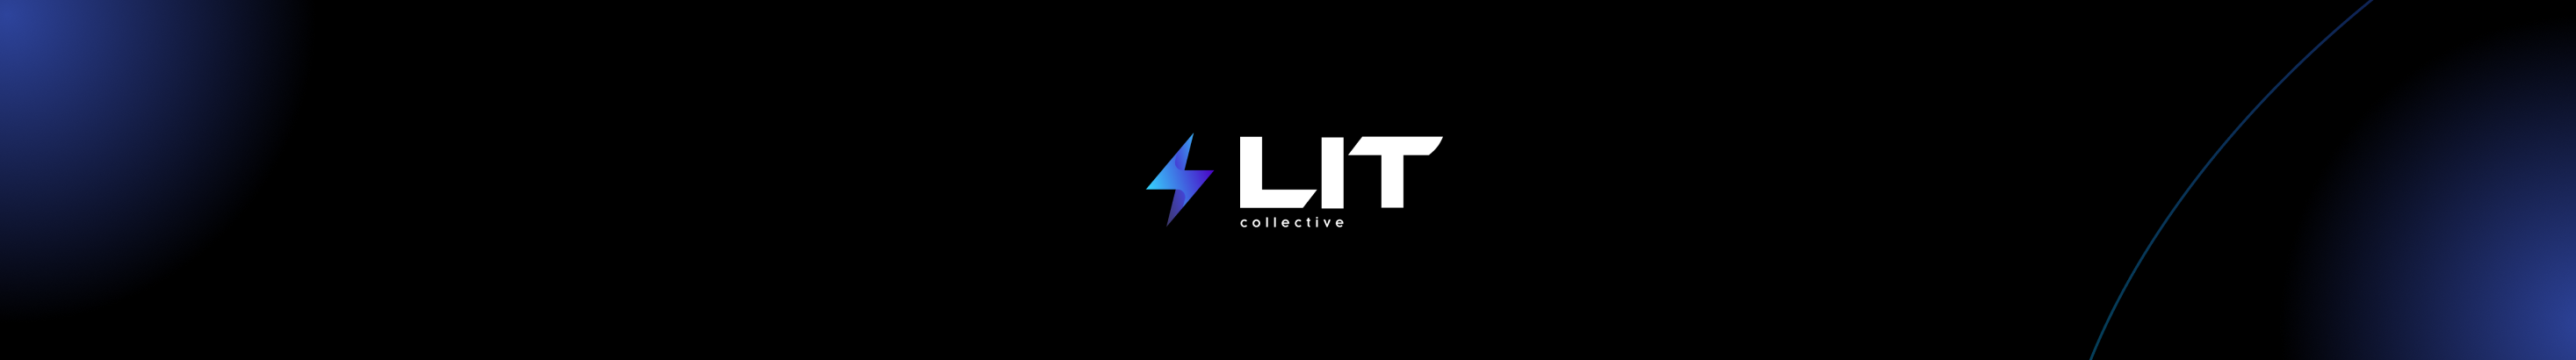 Lit Collective's profile banner